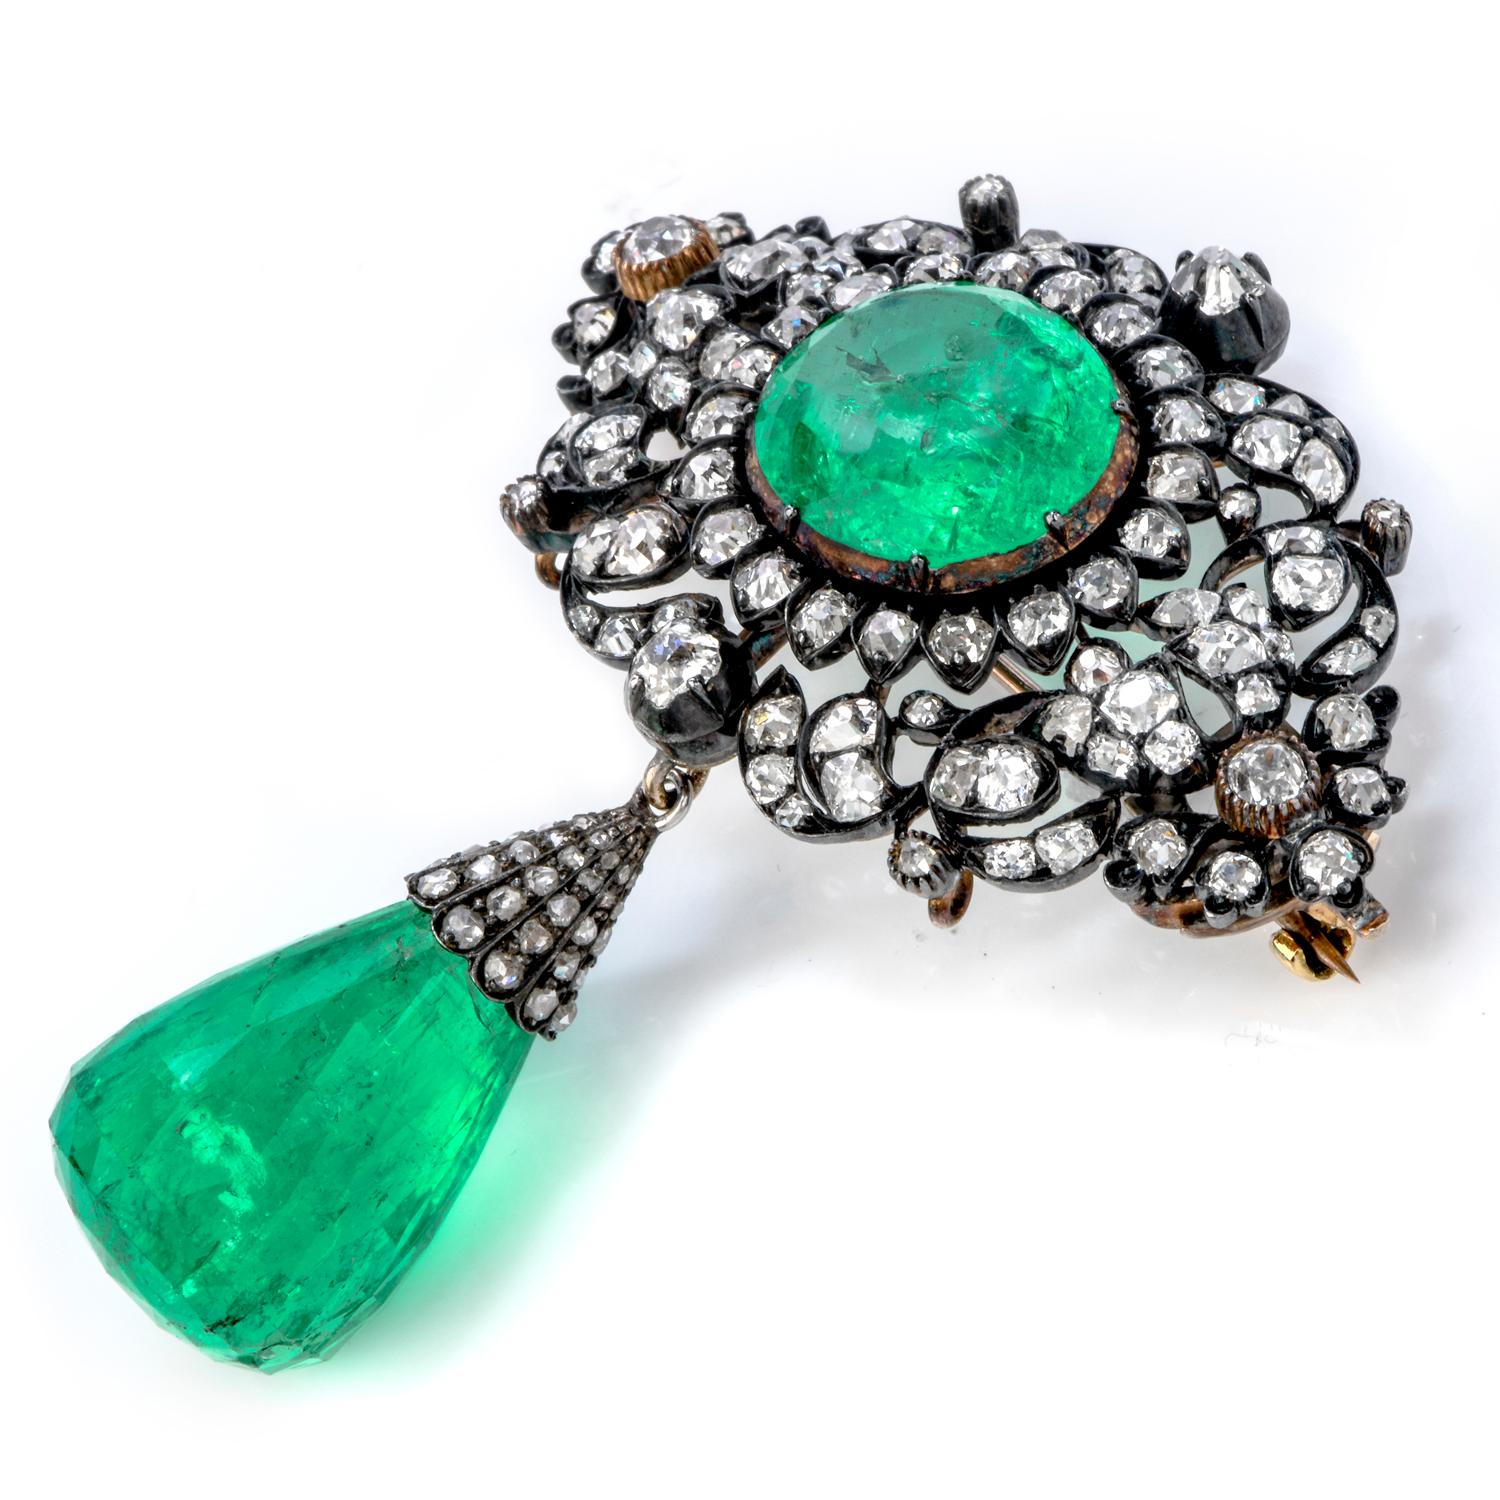 his antique Georgian Emerald Diamond Silver and Gold pendant is masterfully crafted in silver and gold, weighing 17.6 grams and measuring 47mm wide and 57 mm long.

This stunning and rare antique pendant is centered with a large oval-shaped genuine